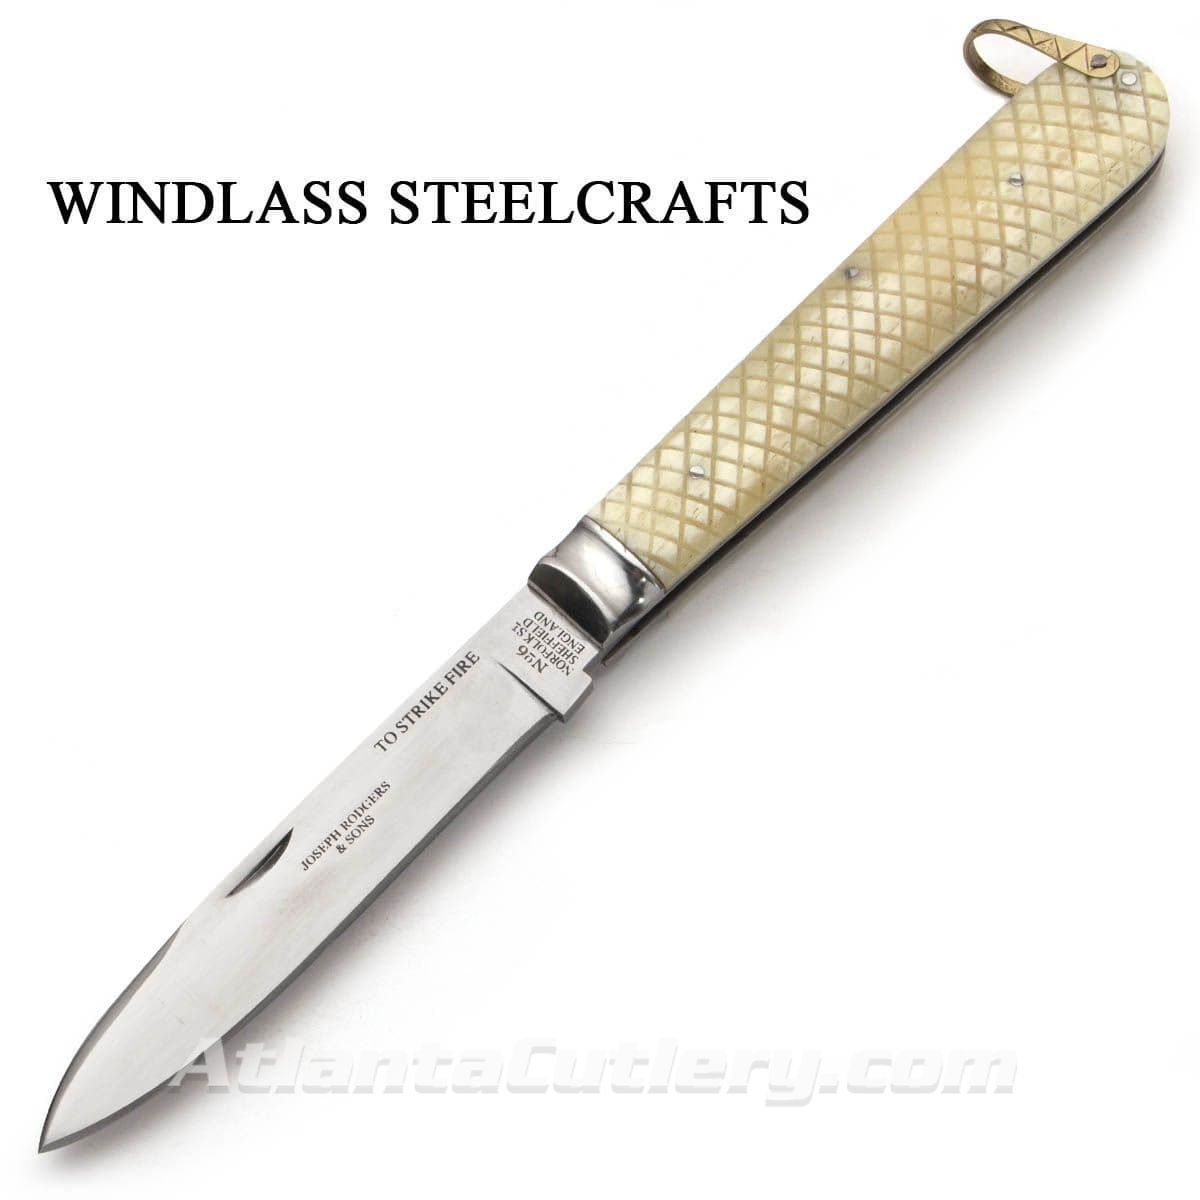 Reproduction Joseph Rodgers & Sons #6 Spear Point Folder with Polished Cross Hatched Camel Bone Scales and Carbon Steel Blade